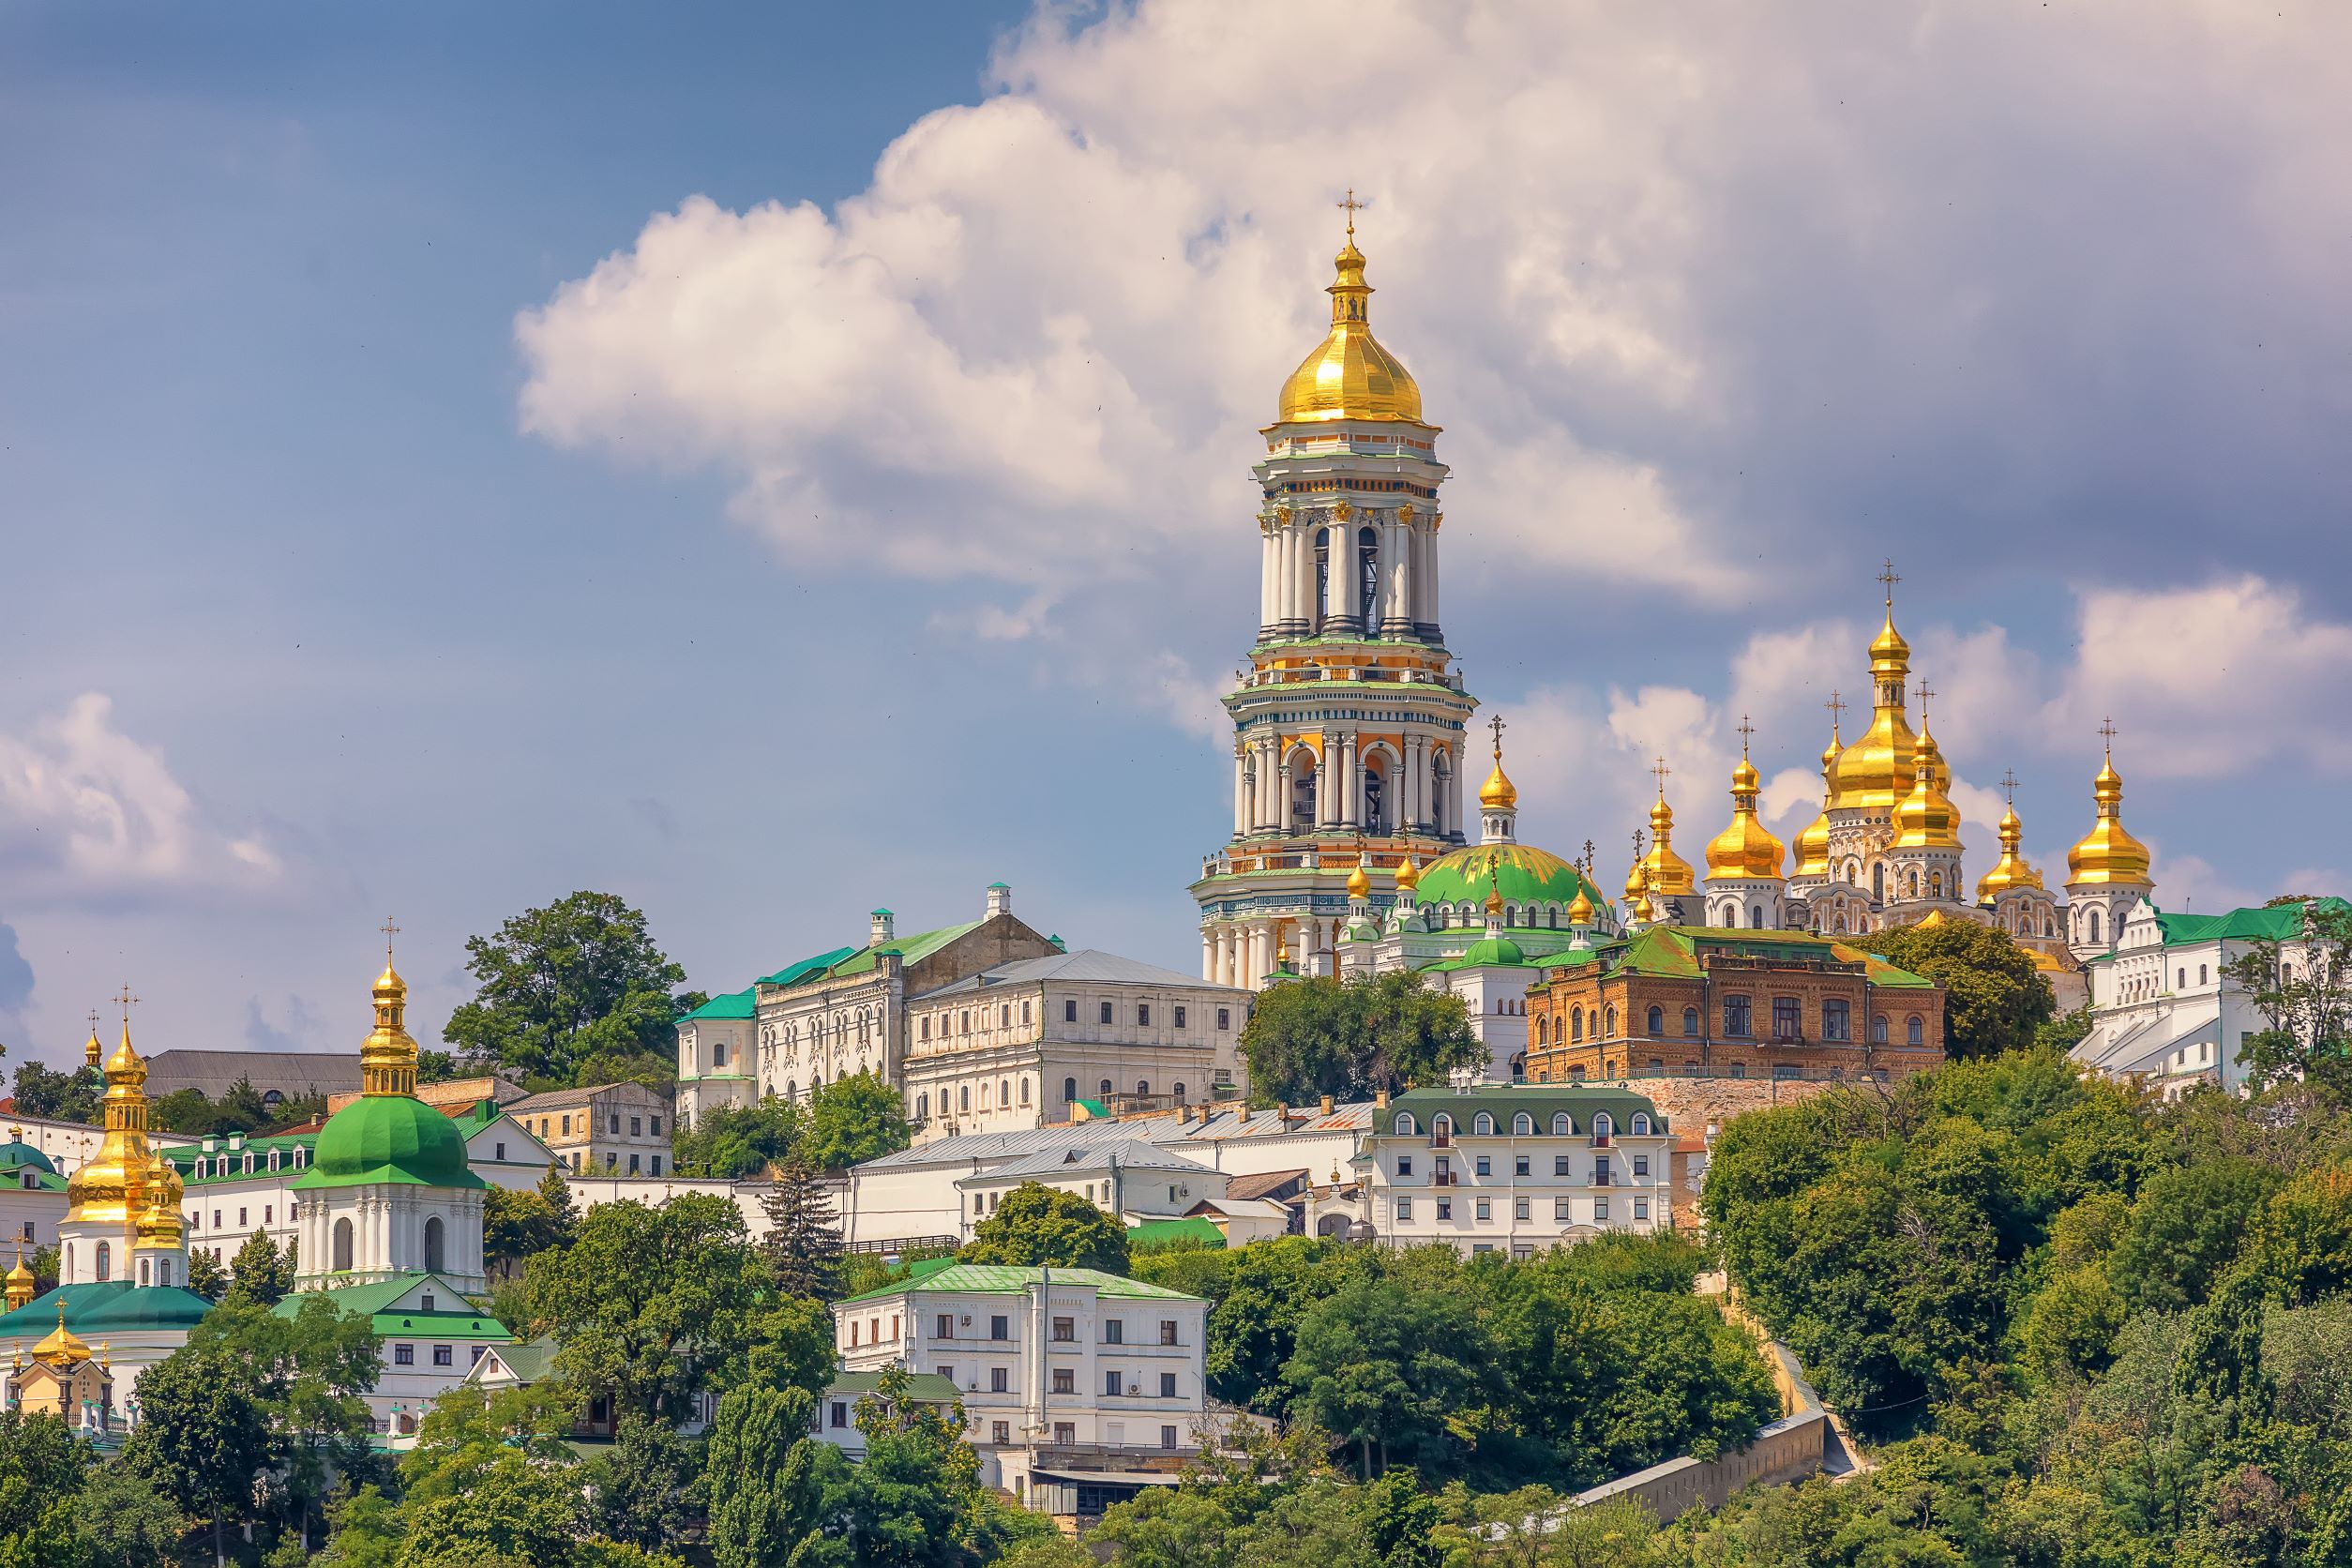 Ornate golden-domed churches in the city of Kyiv